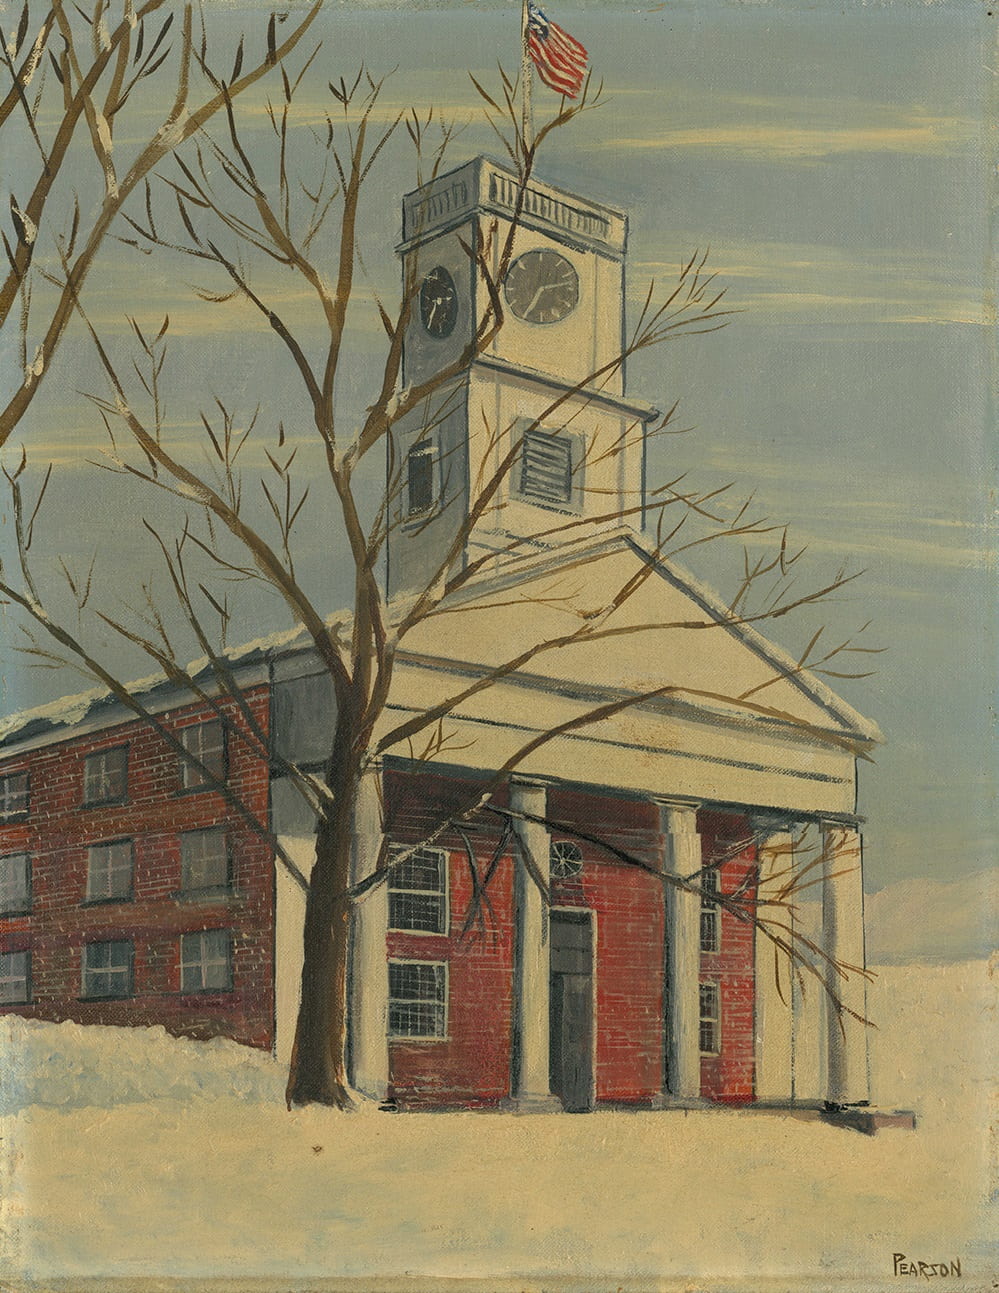 A tall square clock tower tops a brick chapel building with four plain columns. The ground is covered in snow and trees are bare.